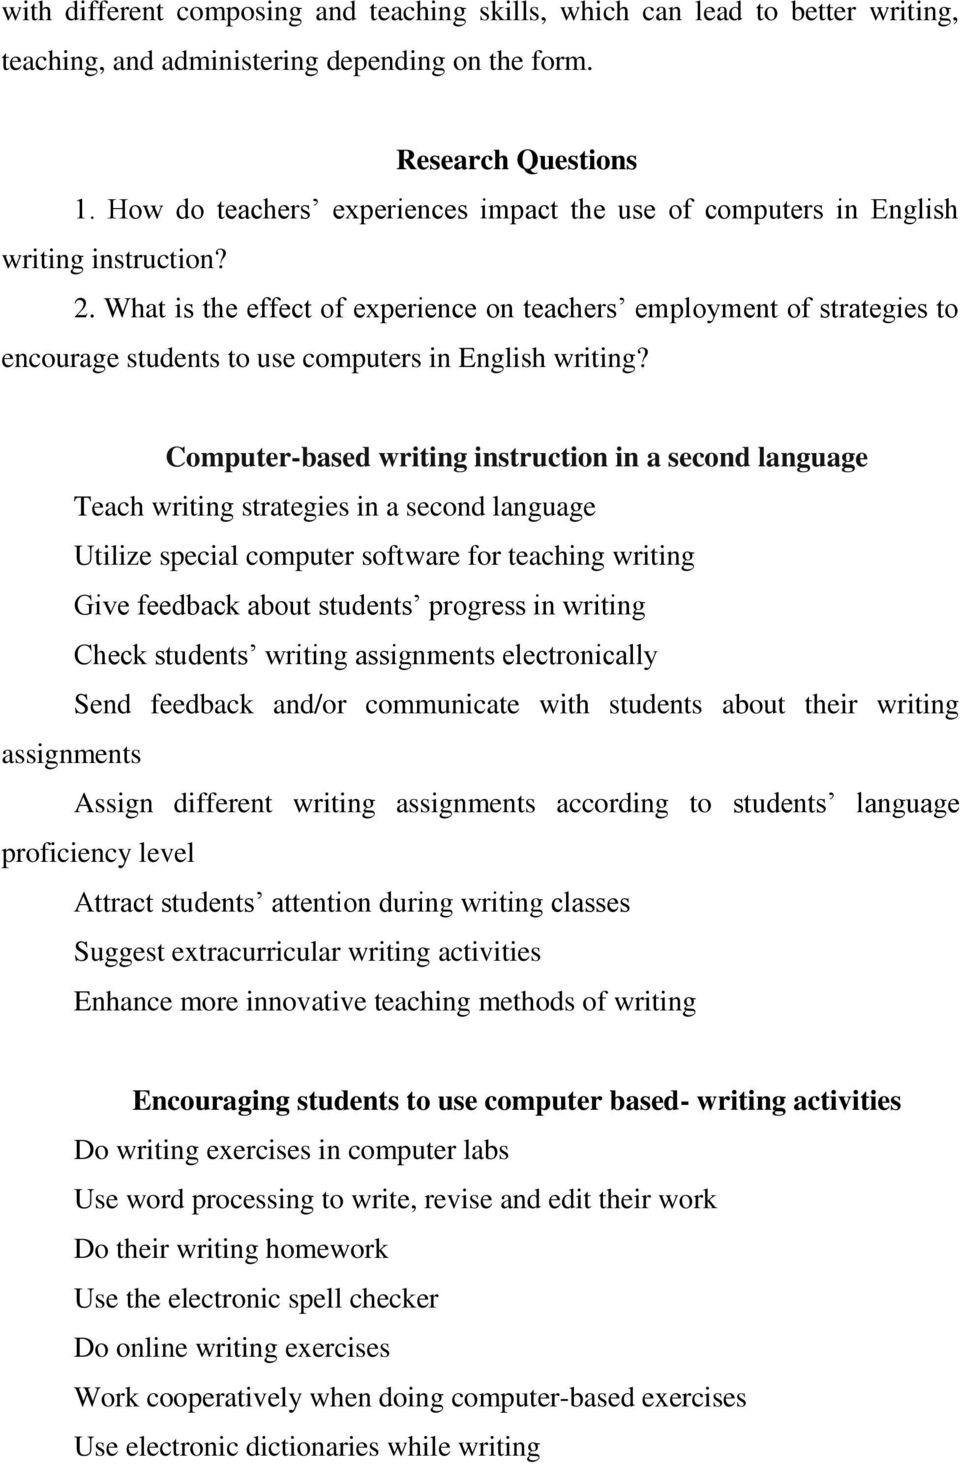 What is the effect of experience on teachers employment of strategies to encourage students to use computers in English writing?